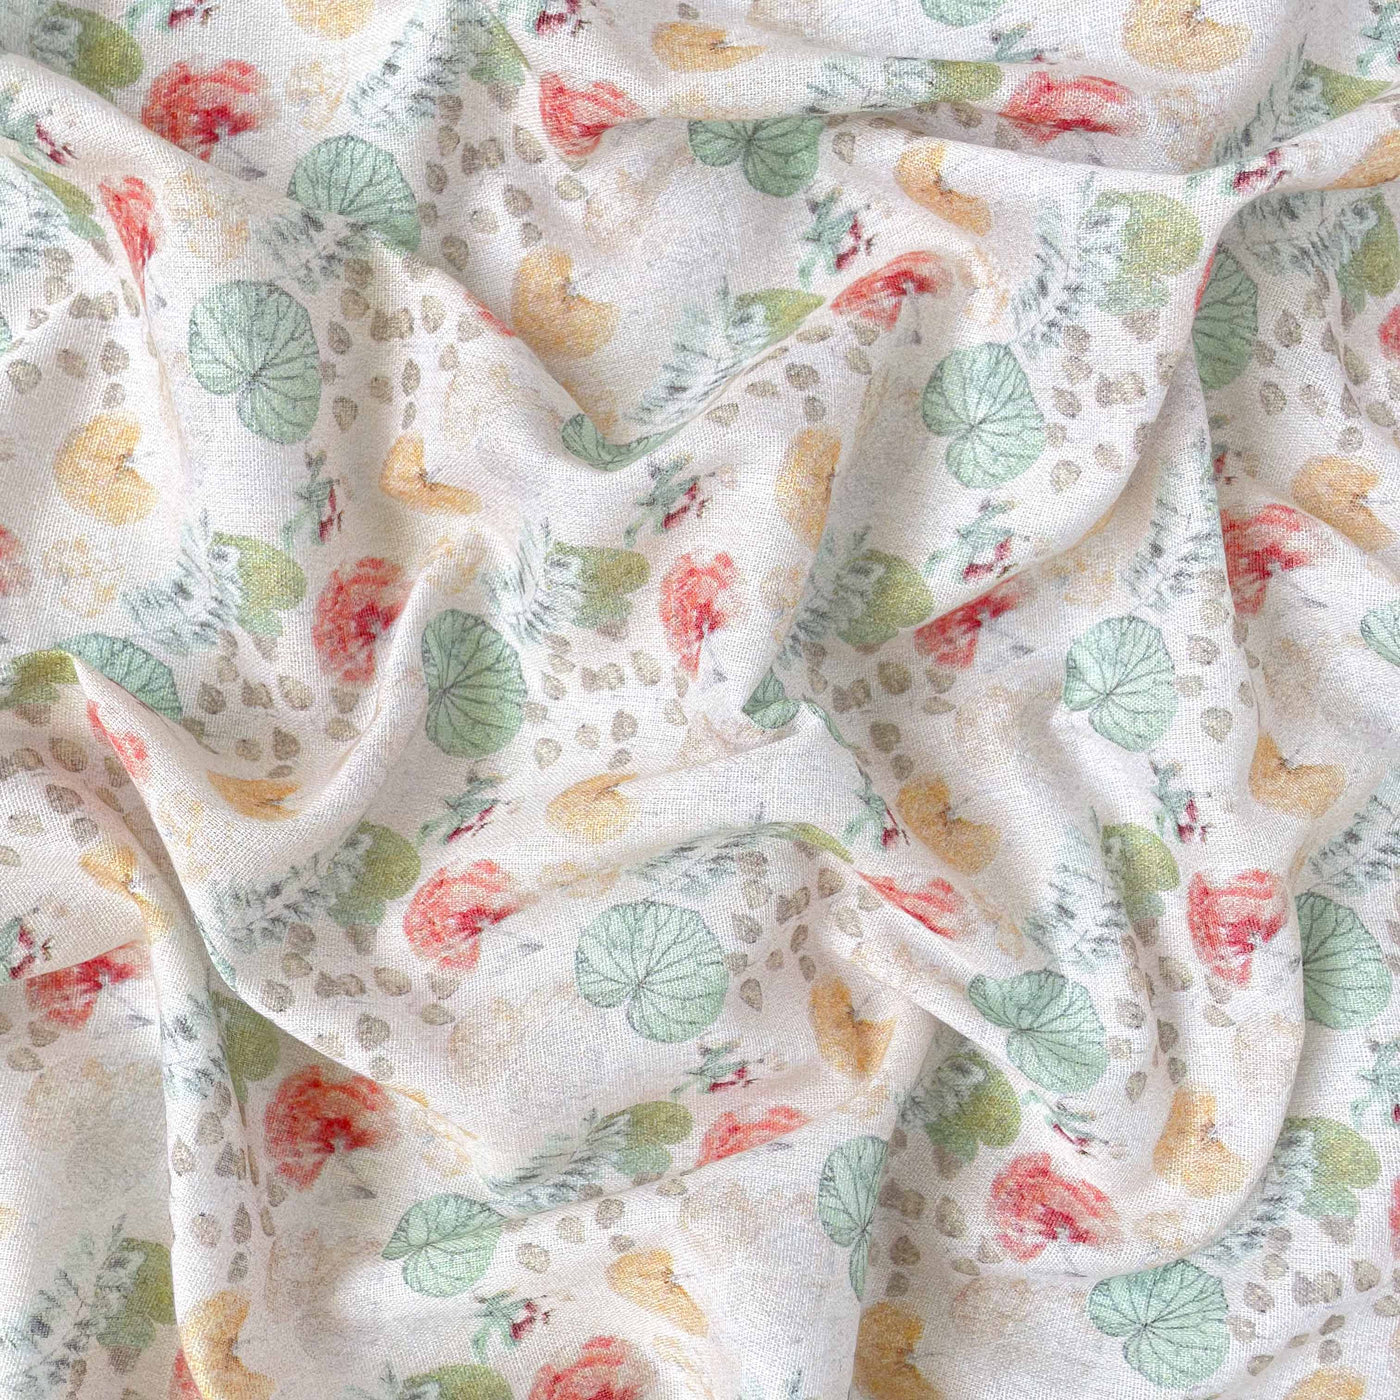 Printed Pure Cotton Linen Fabric Fabric Unisex Colorful Treasured Blooms Printed Pure Cotton Linen Fabric (Width 44 Inches)